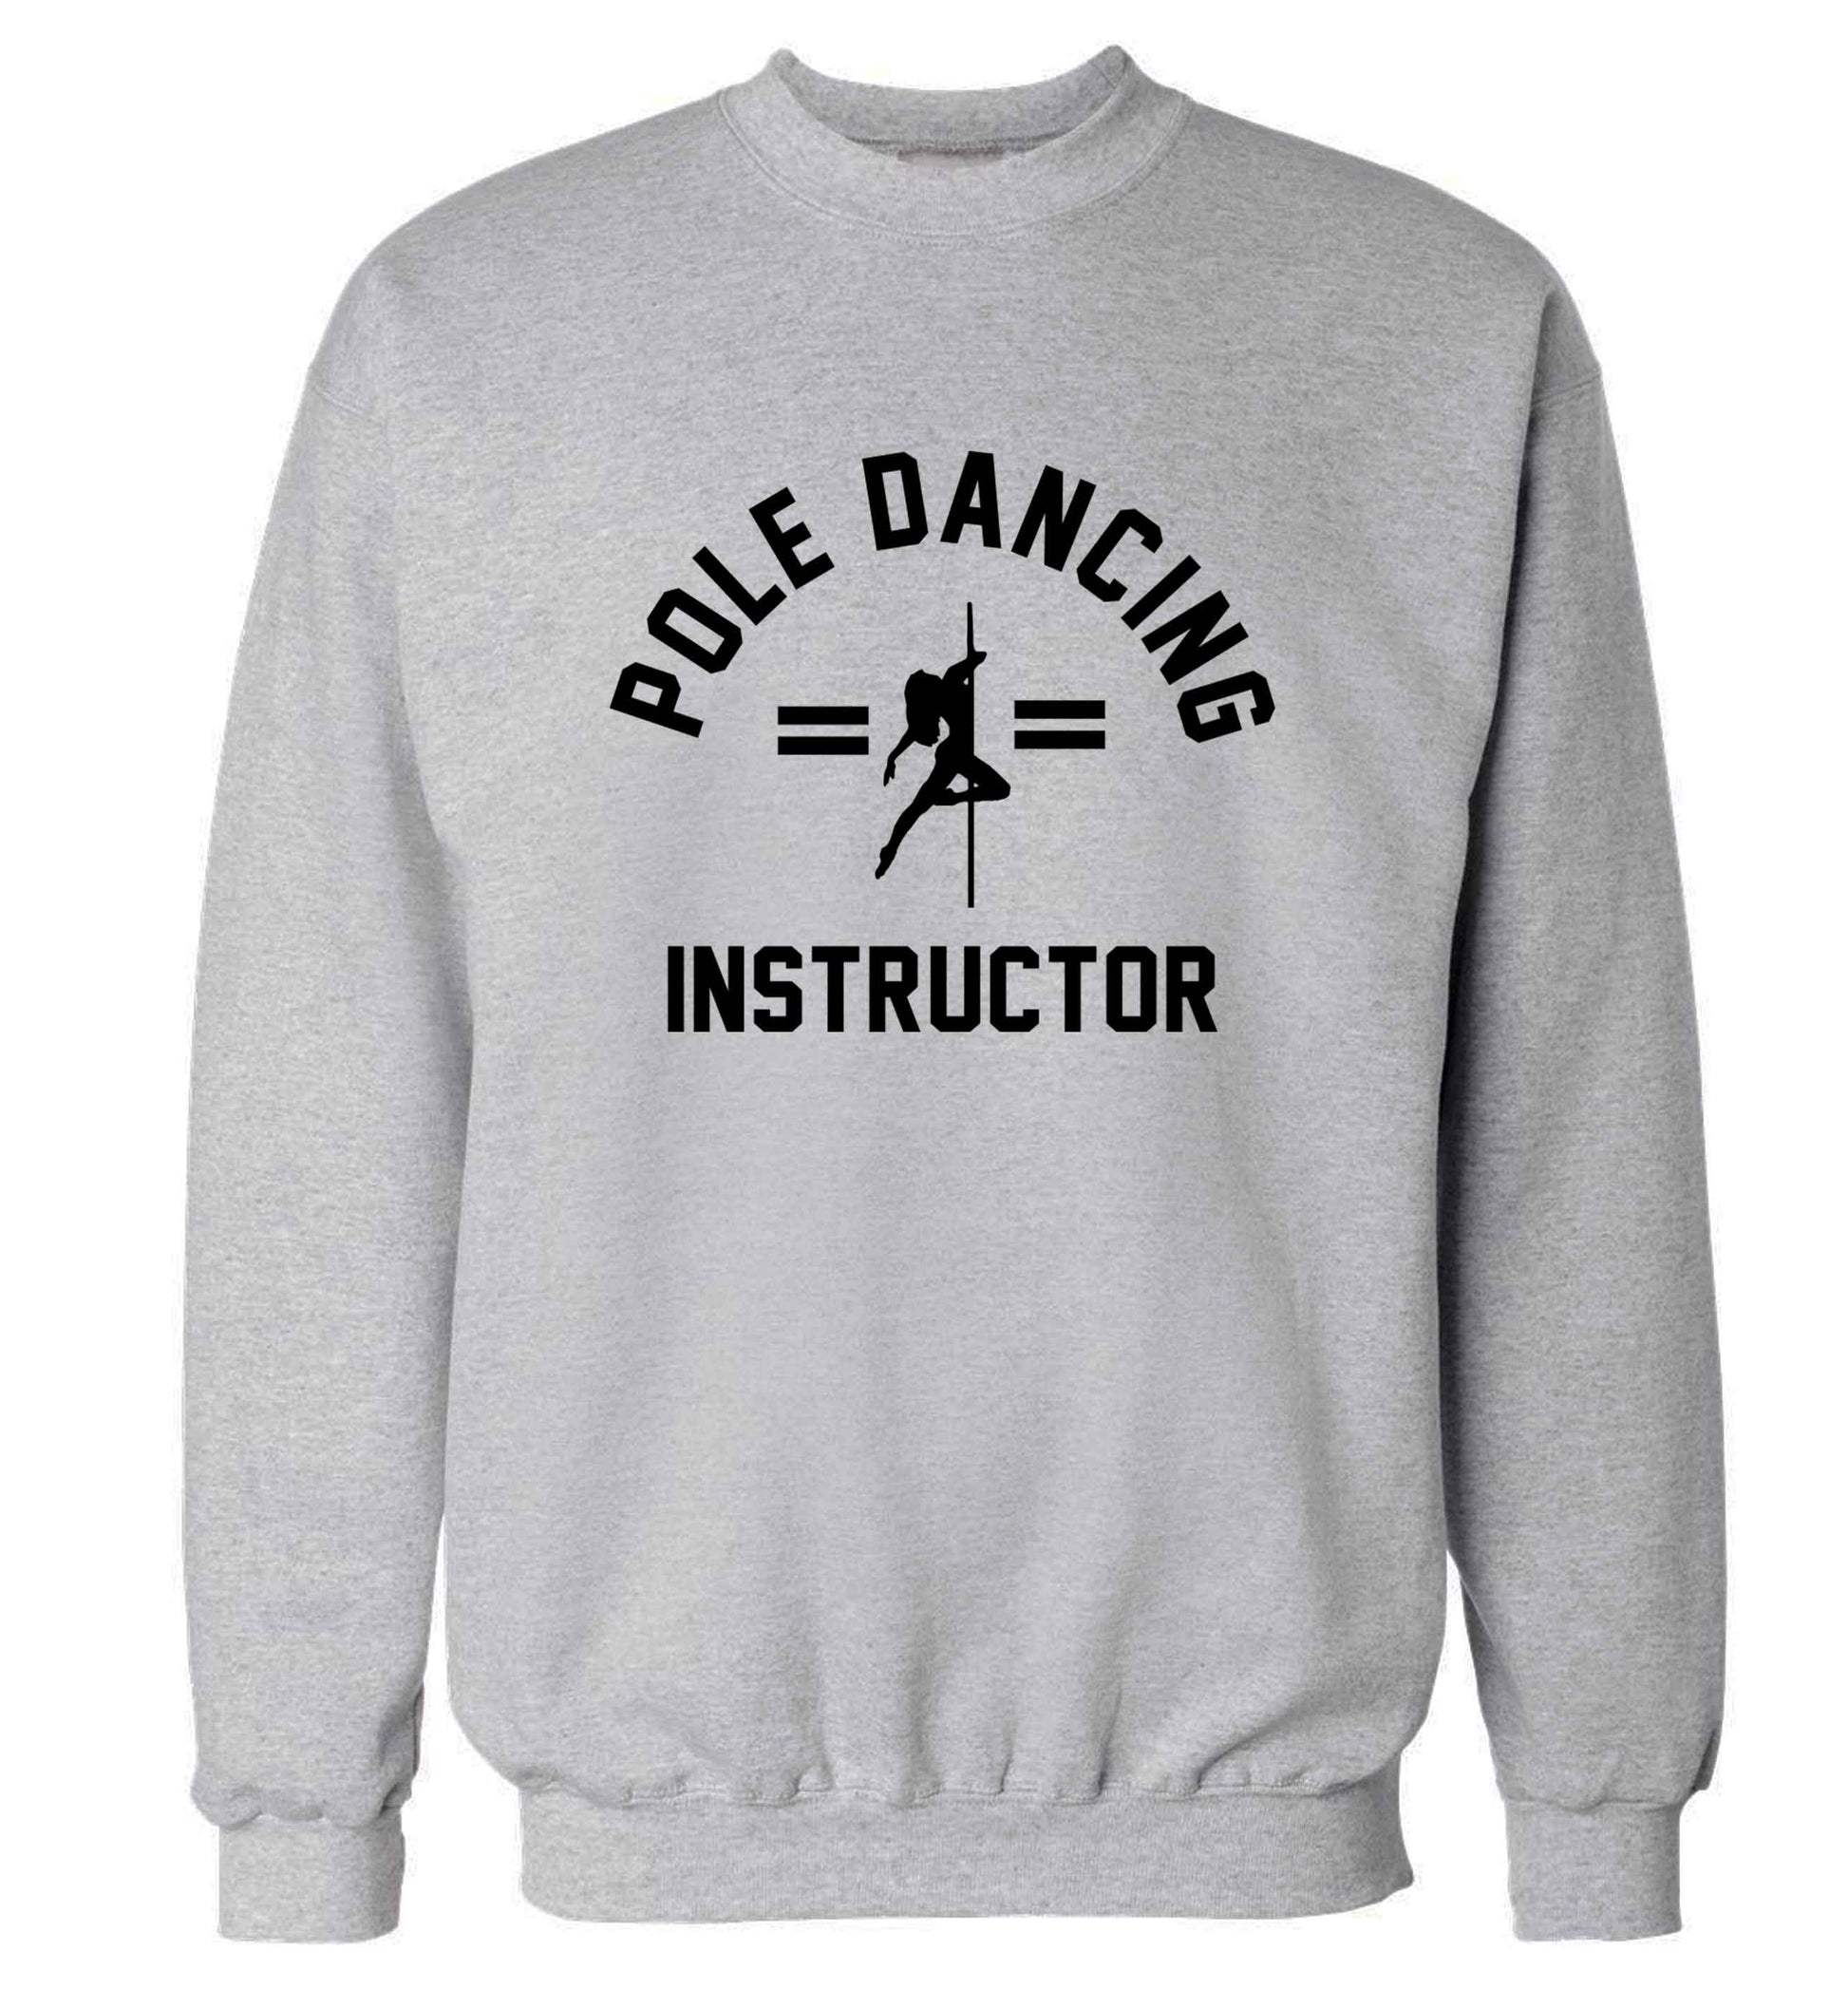 Pole dancing instructor adult's unisex grey sweater 2XL